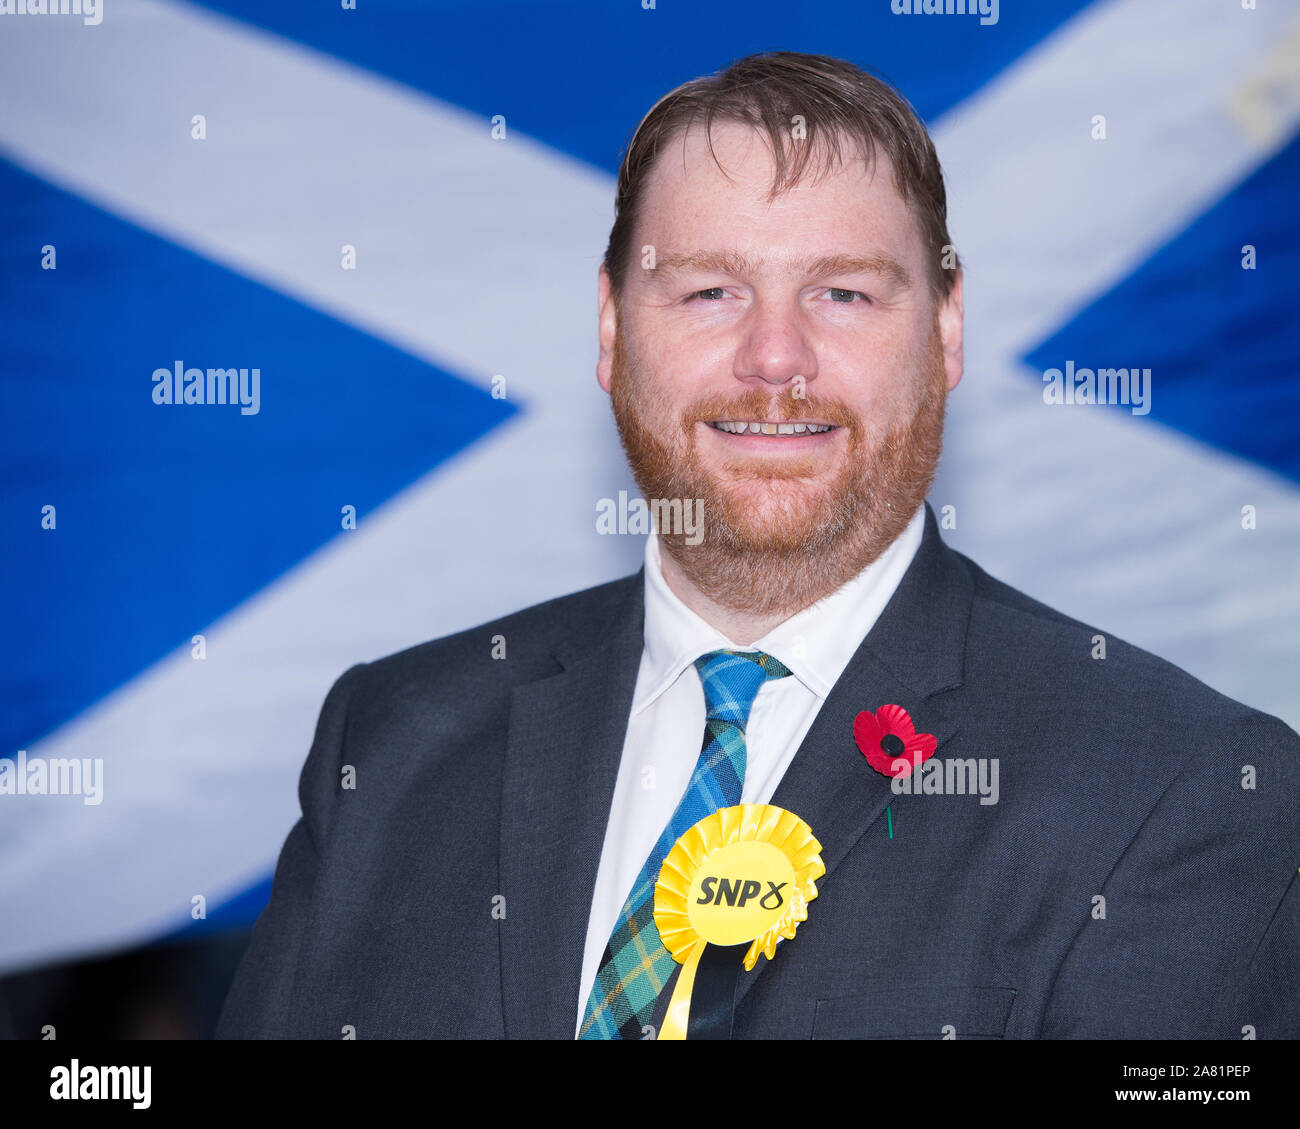 Dalkeith, UK. 5 November 2019. Pictured: Owen Thompson - SNP Candidate for Midlothian. First Minister Nicola Sturgeon joins Owen Thompson, SNP candidate for Midlothian, to campaign in Dalkeith. Speaking ahead of the visit, Nicola Sturgeon said: “Brexit is far from a done deal.”  “Even if Boris Johnson was to get his deal passed, that would only be the beginning – not the end – of trade talks with the EU.”   Credit: Colin Fisher/Alamy Live News. Credit: Colin Fisher/Alamy Live News Stock Photo